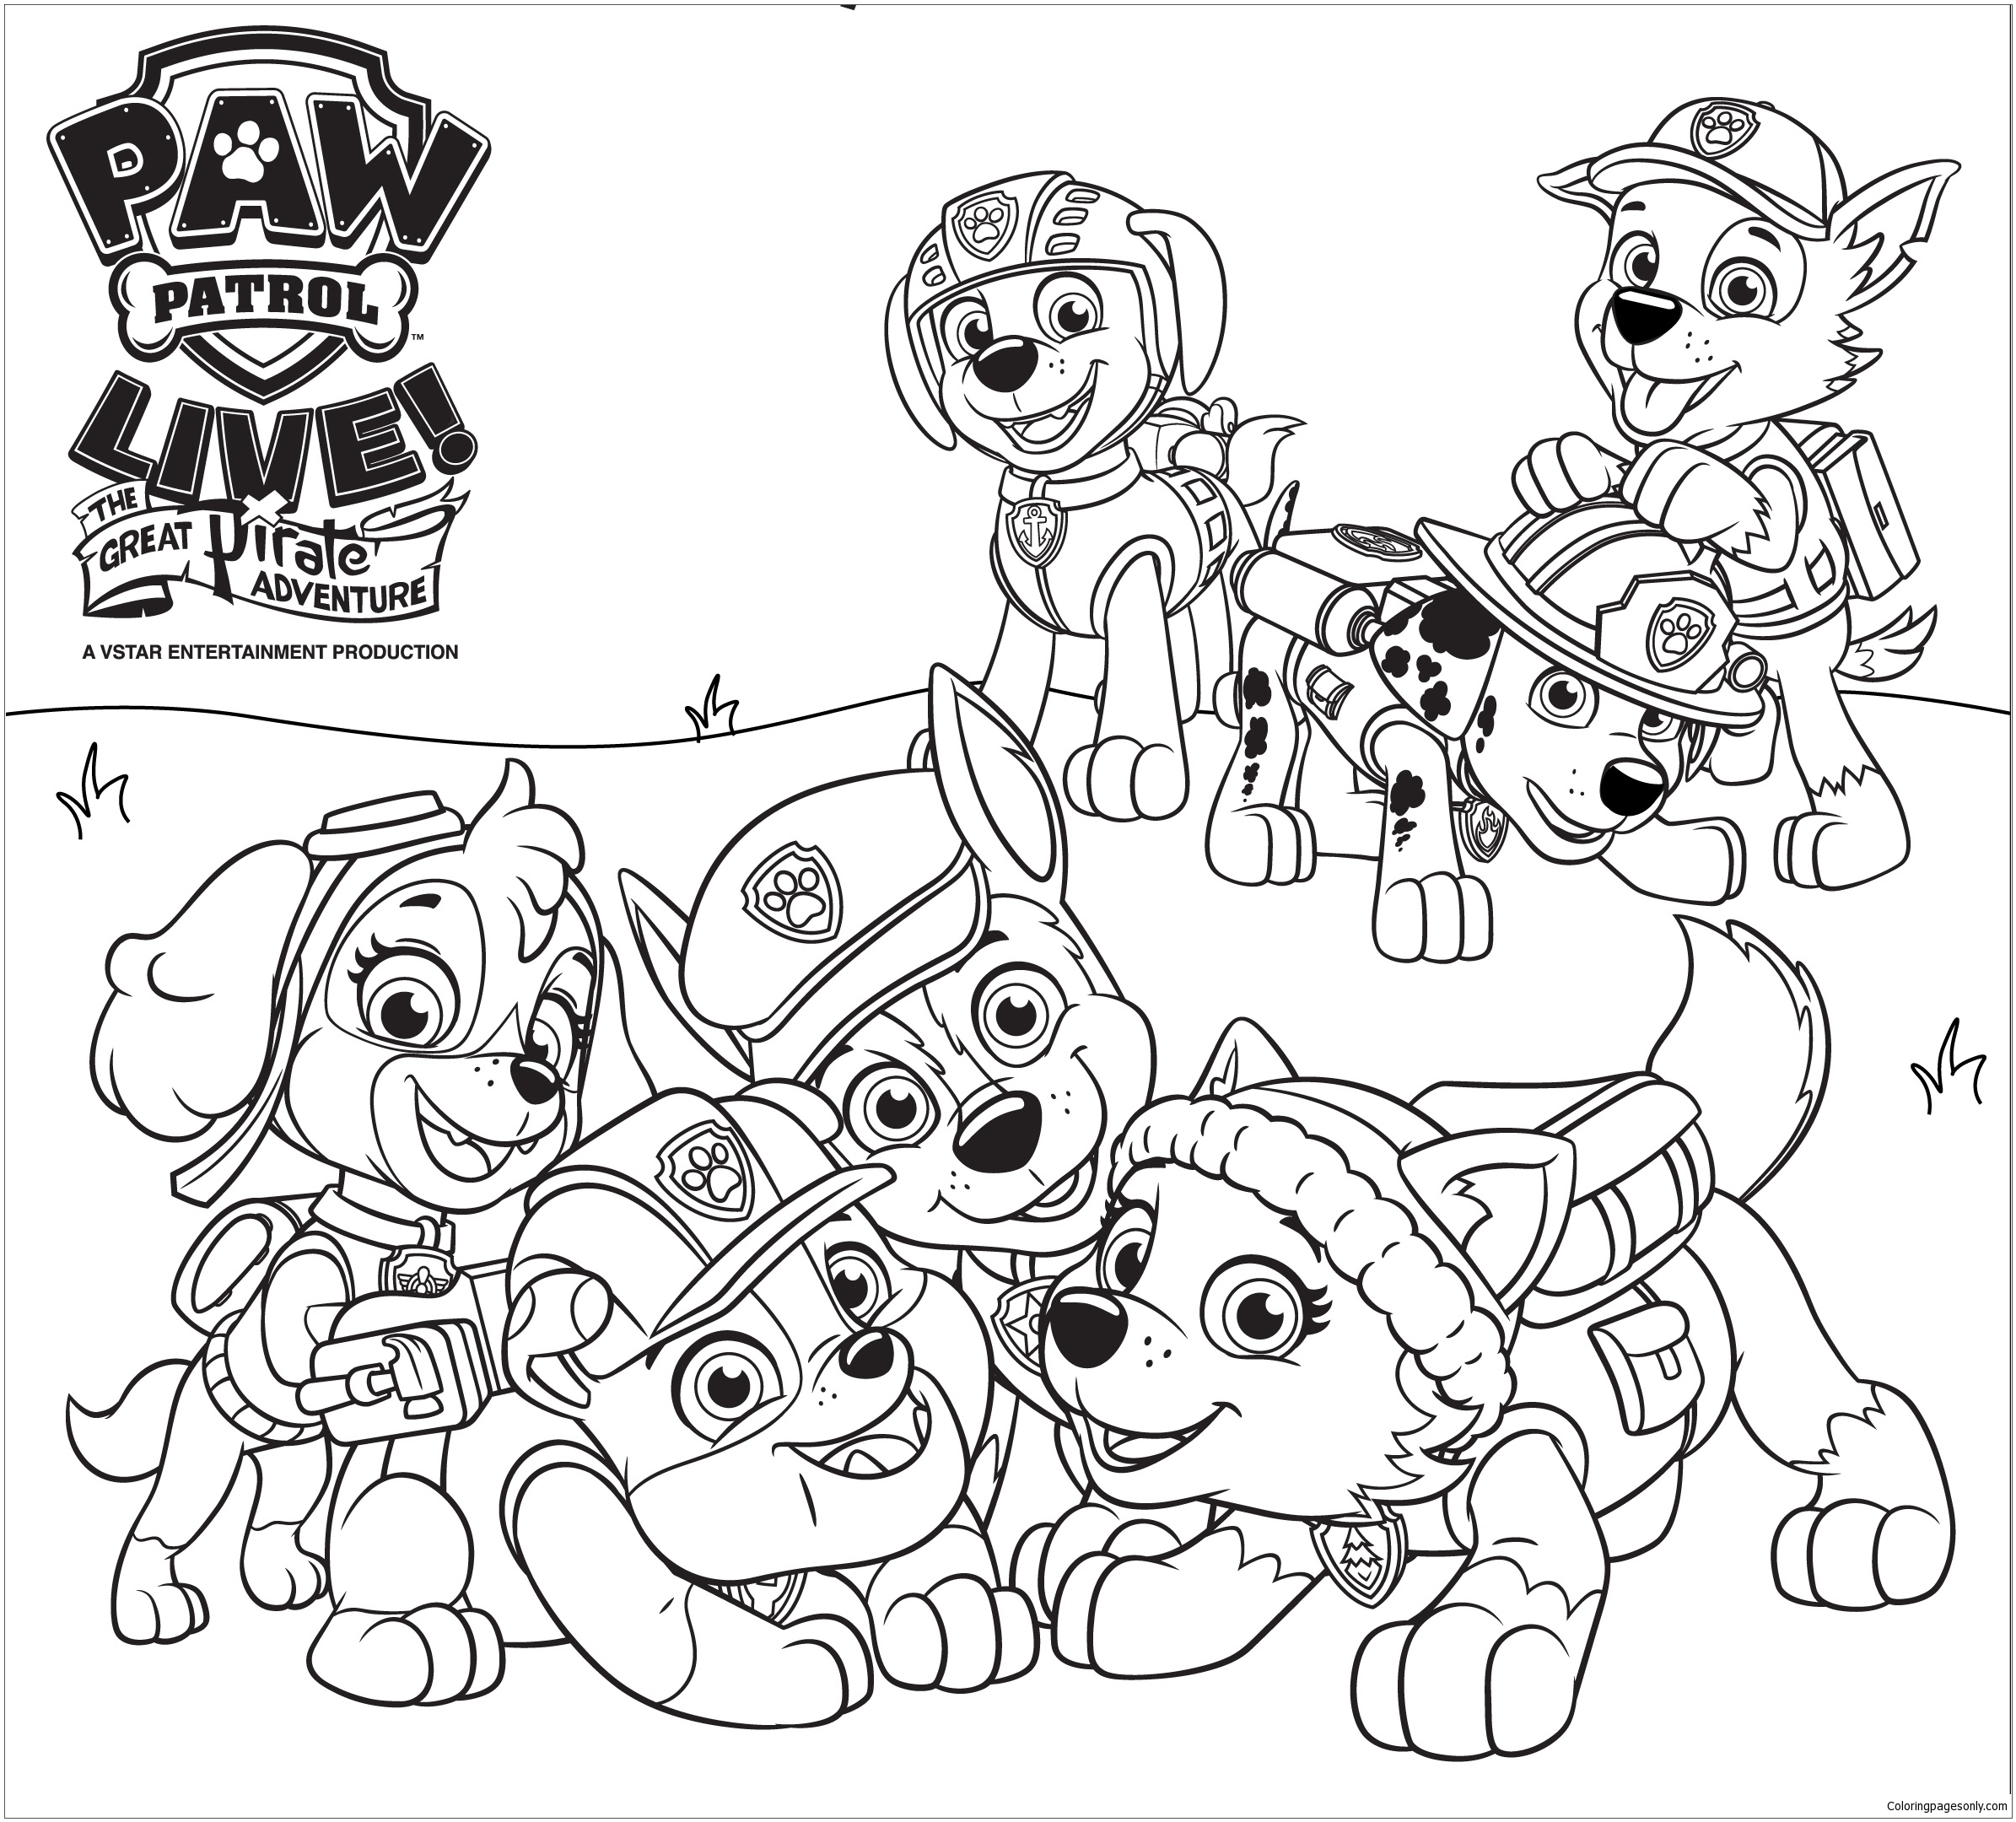 paw-patrol-45-coloring-page-free-coloring-pages-online